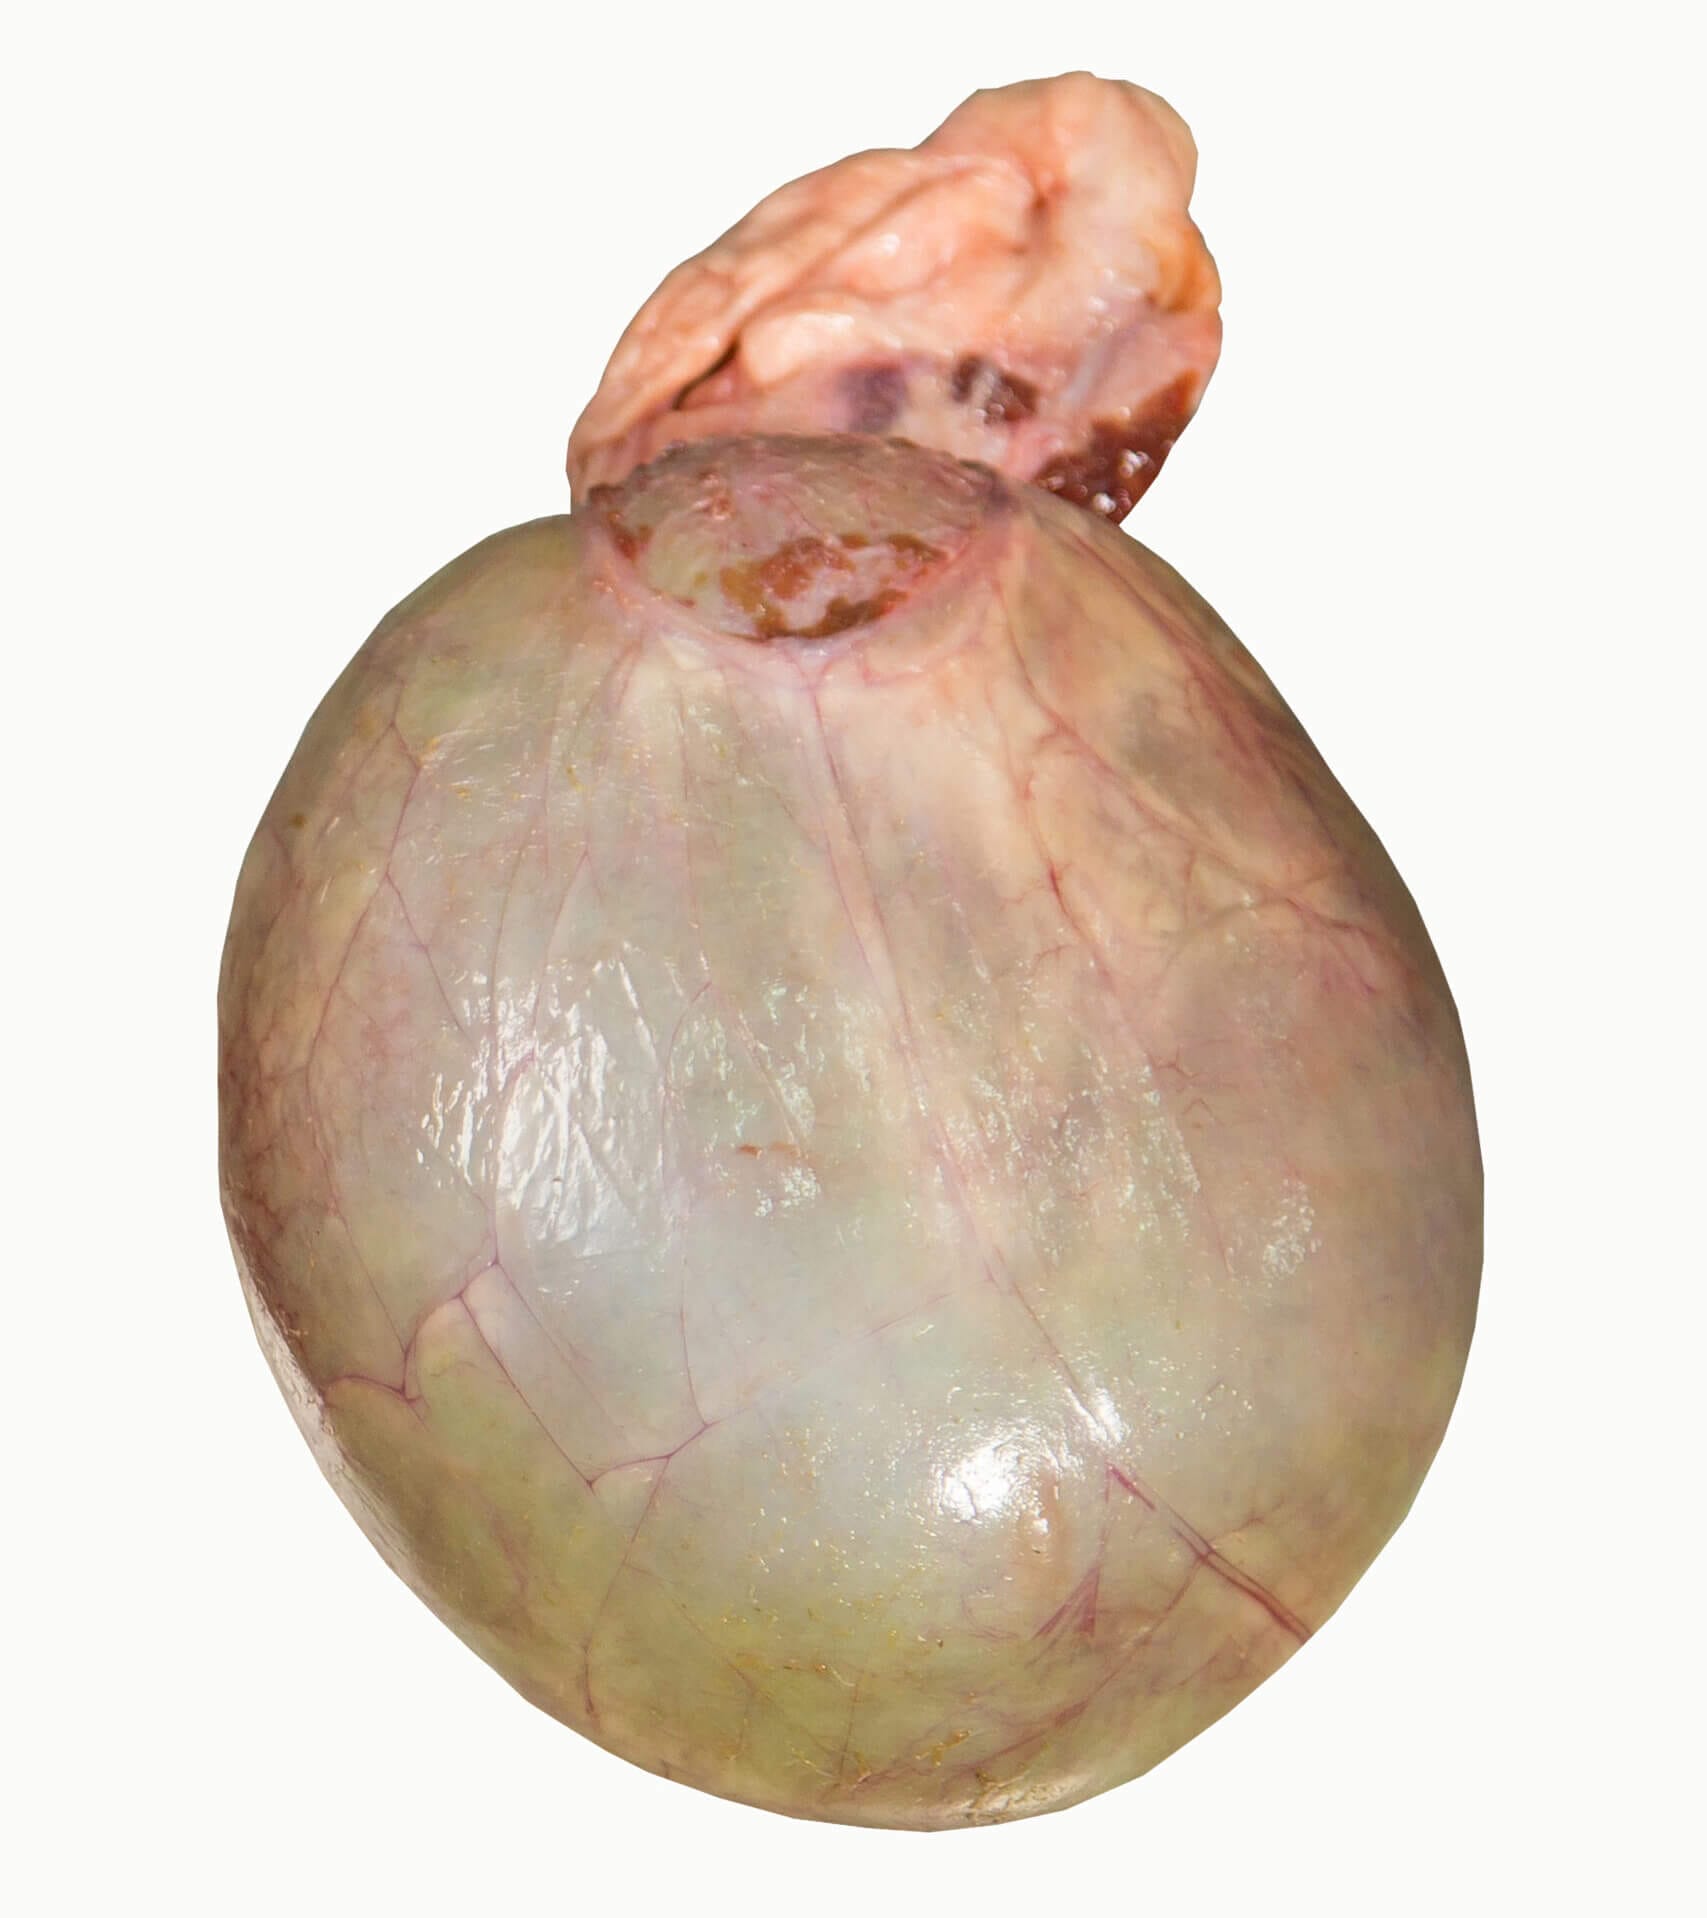 A picture of beef gallbladder.